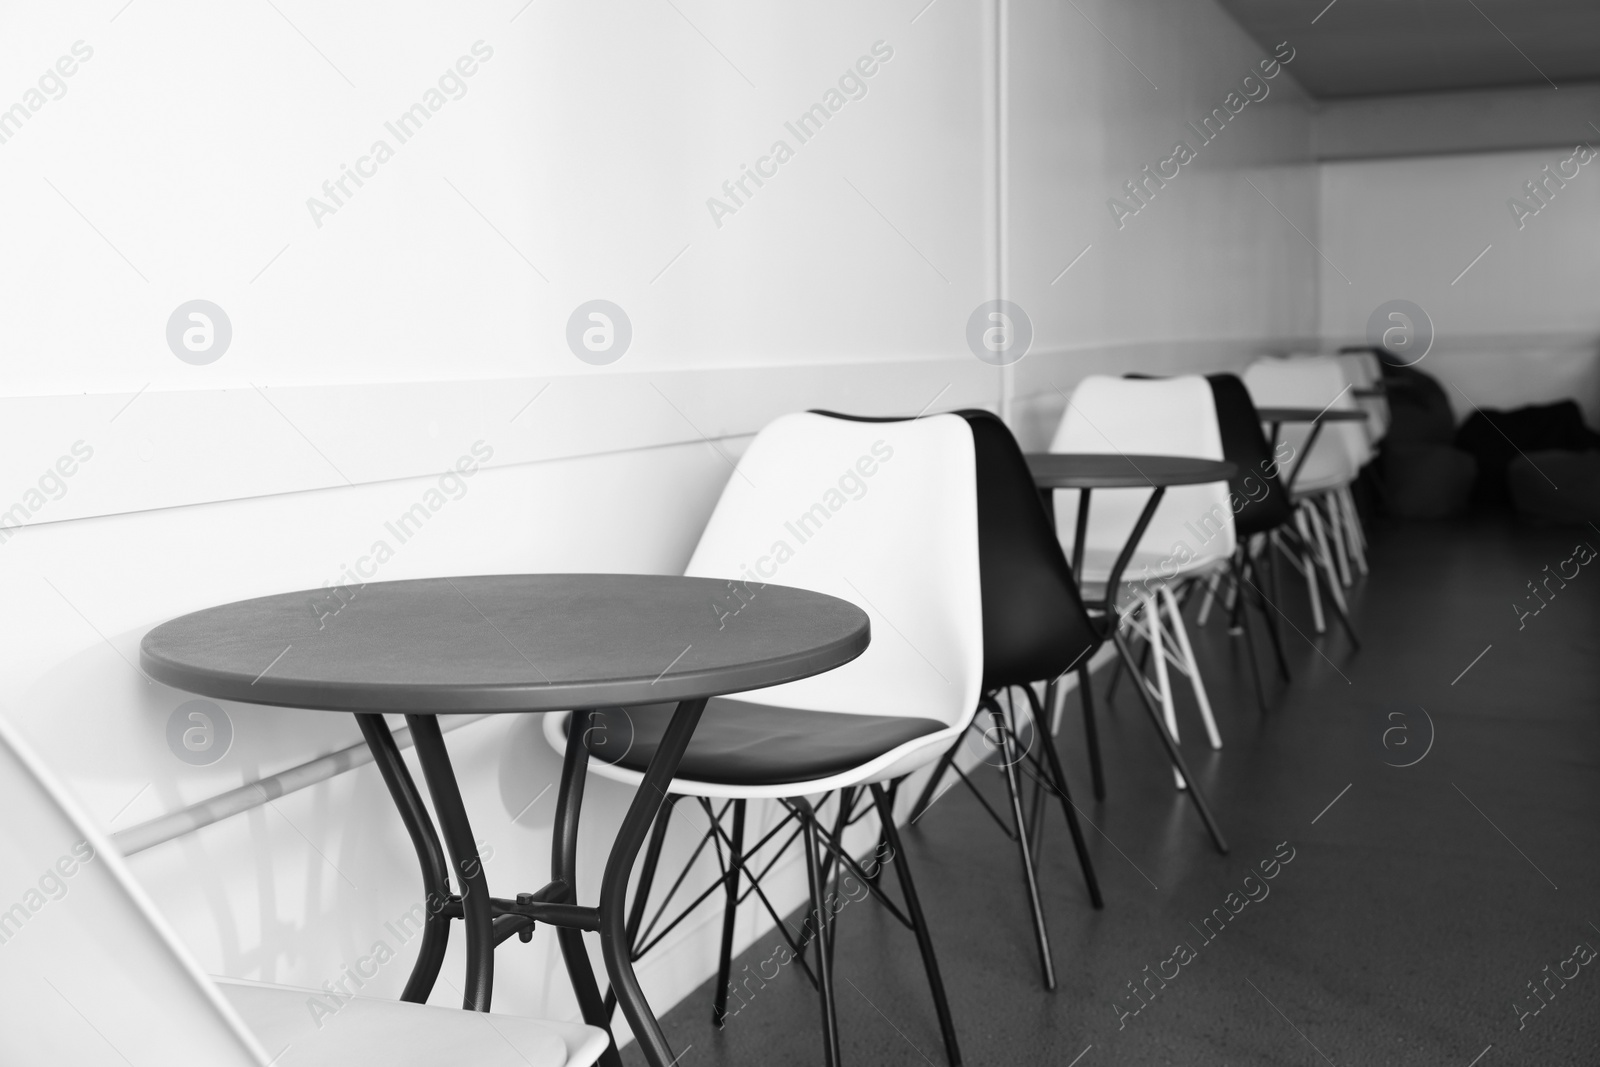 Photo of Hostel dining room interior with tables and chairs along white wall